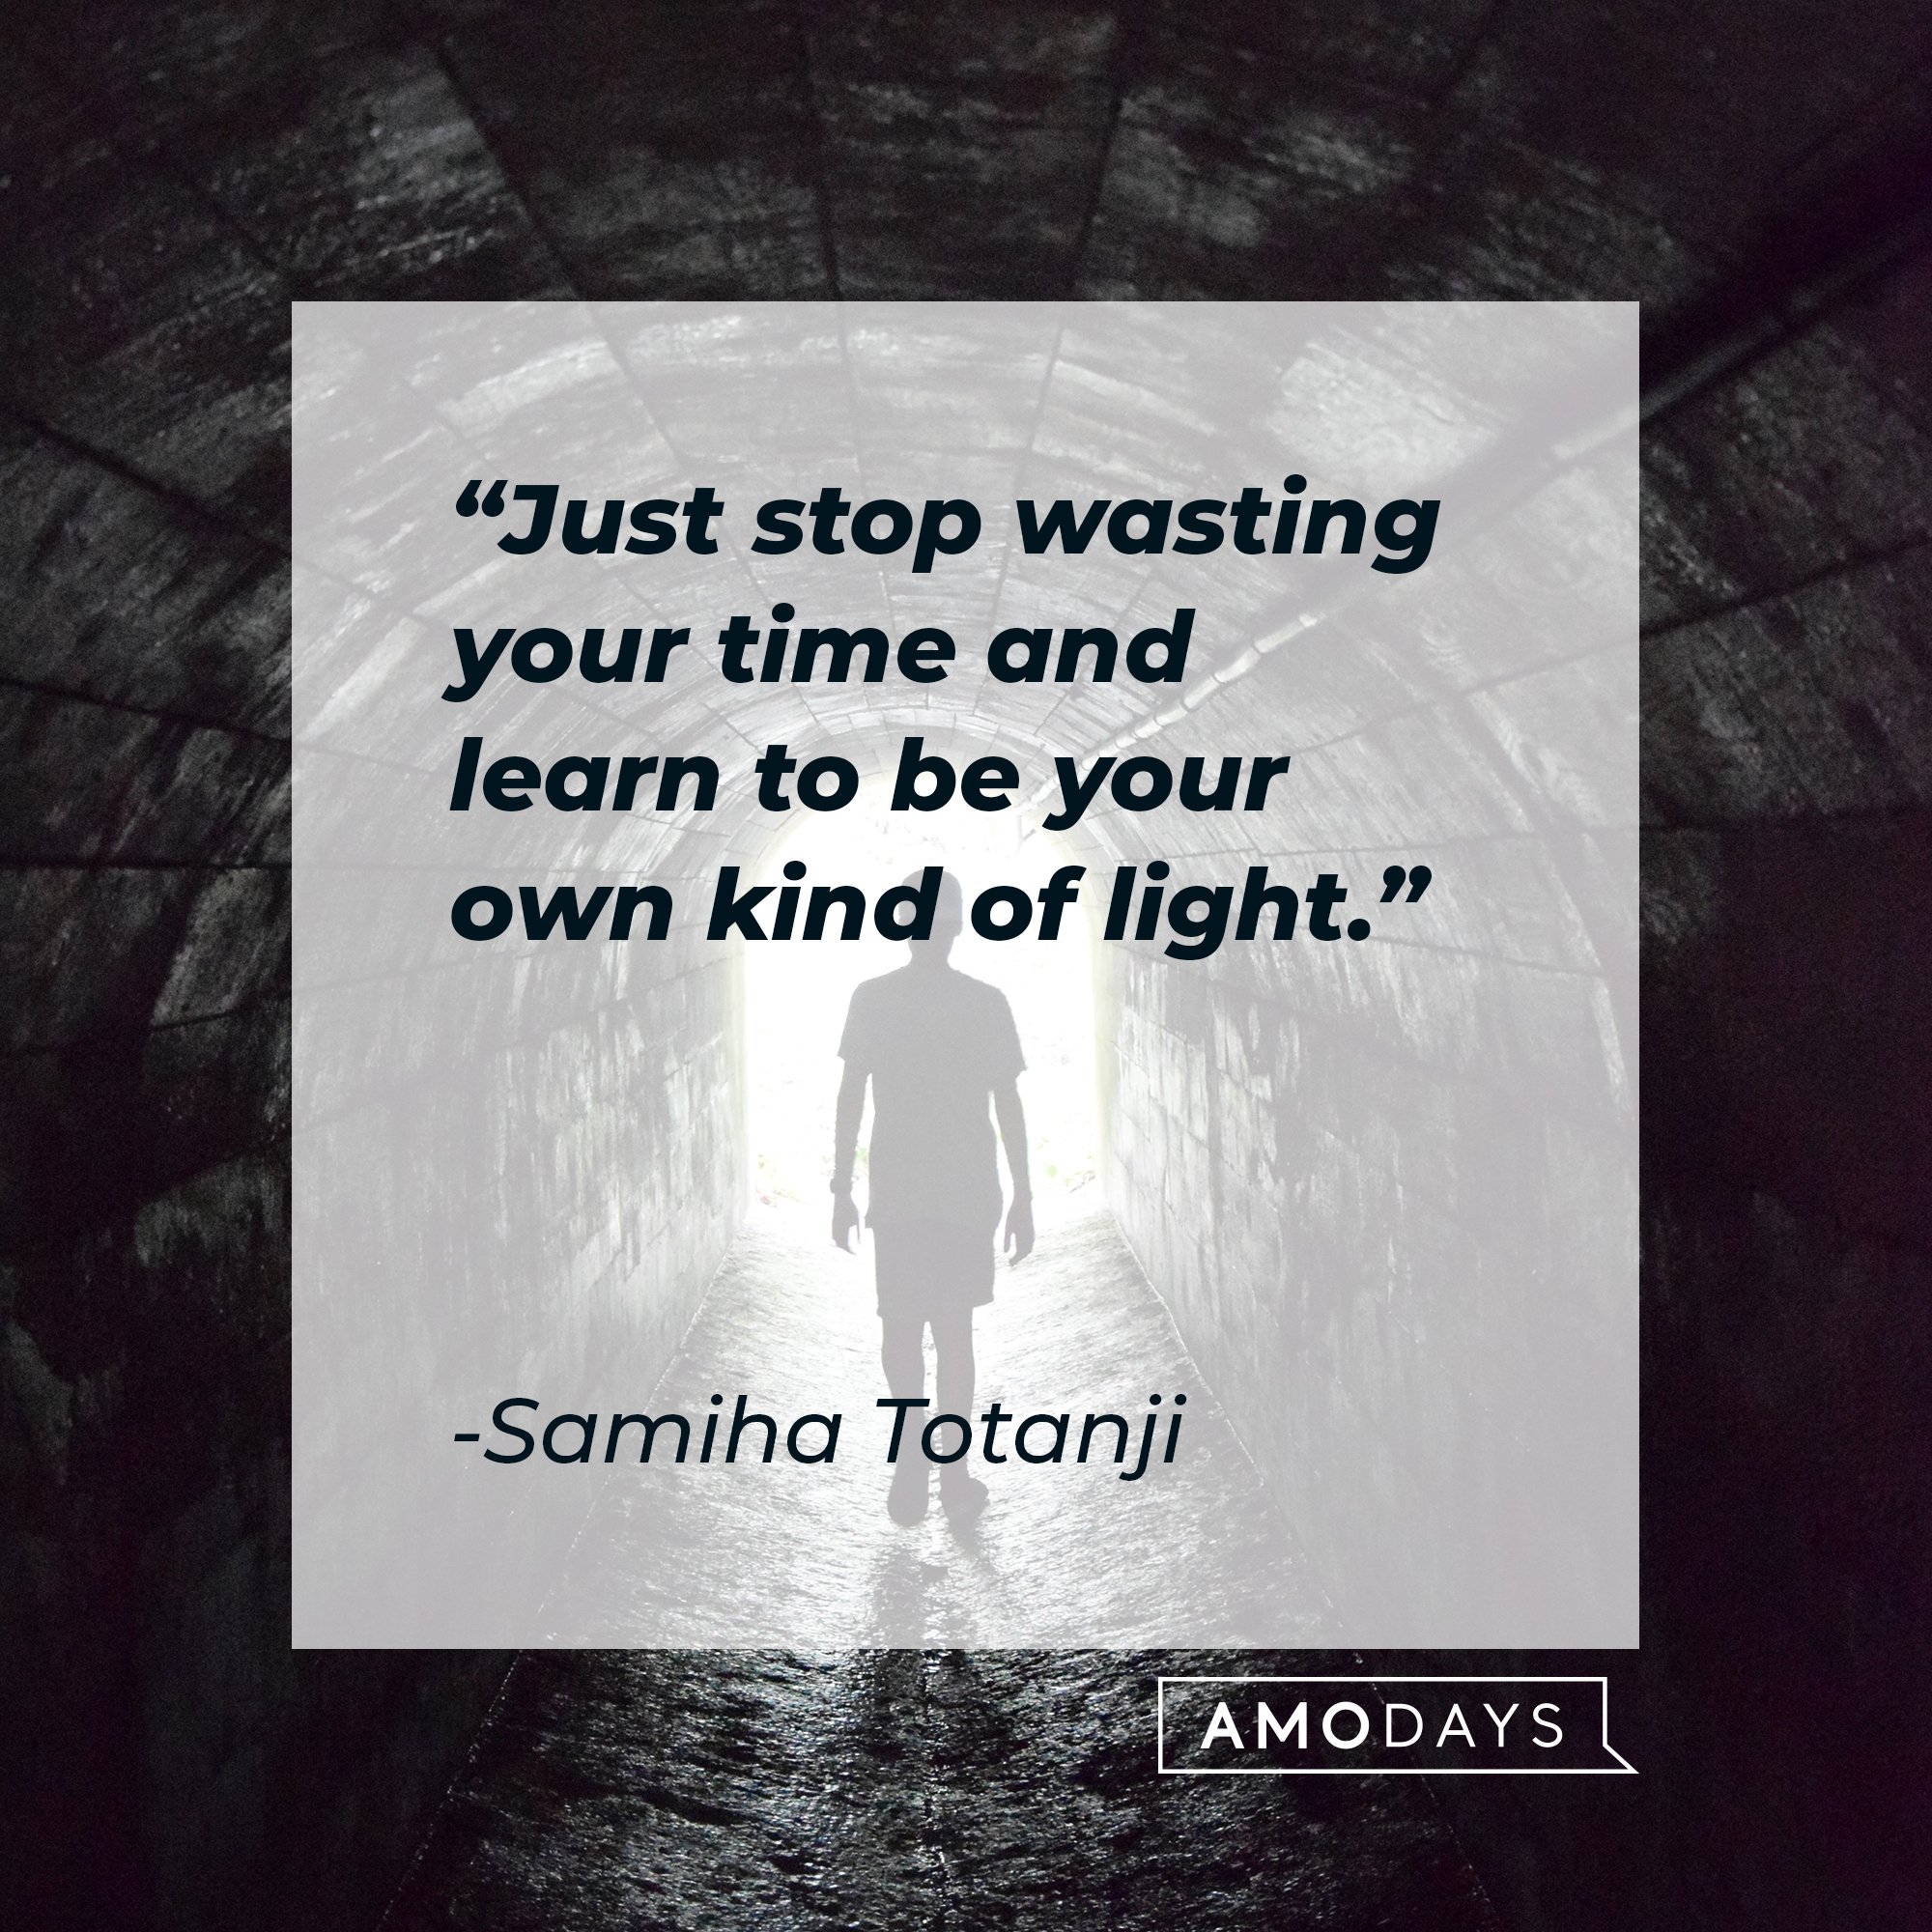 Samiha Totanji’s quote: "Just stop wasting your time and learn to be your own kind of light." | Image: AmoDays